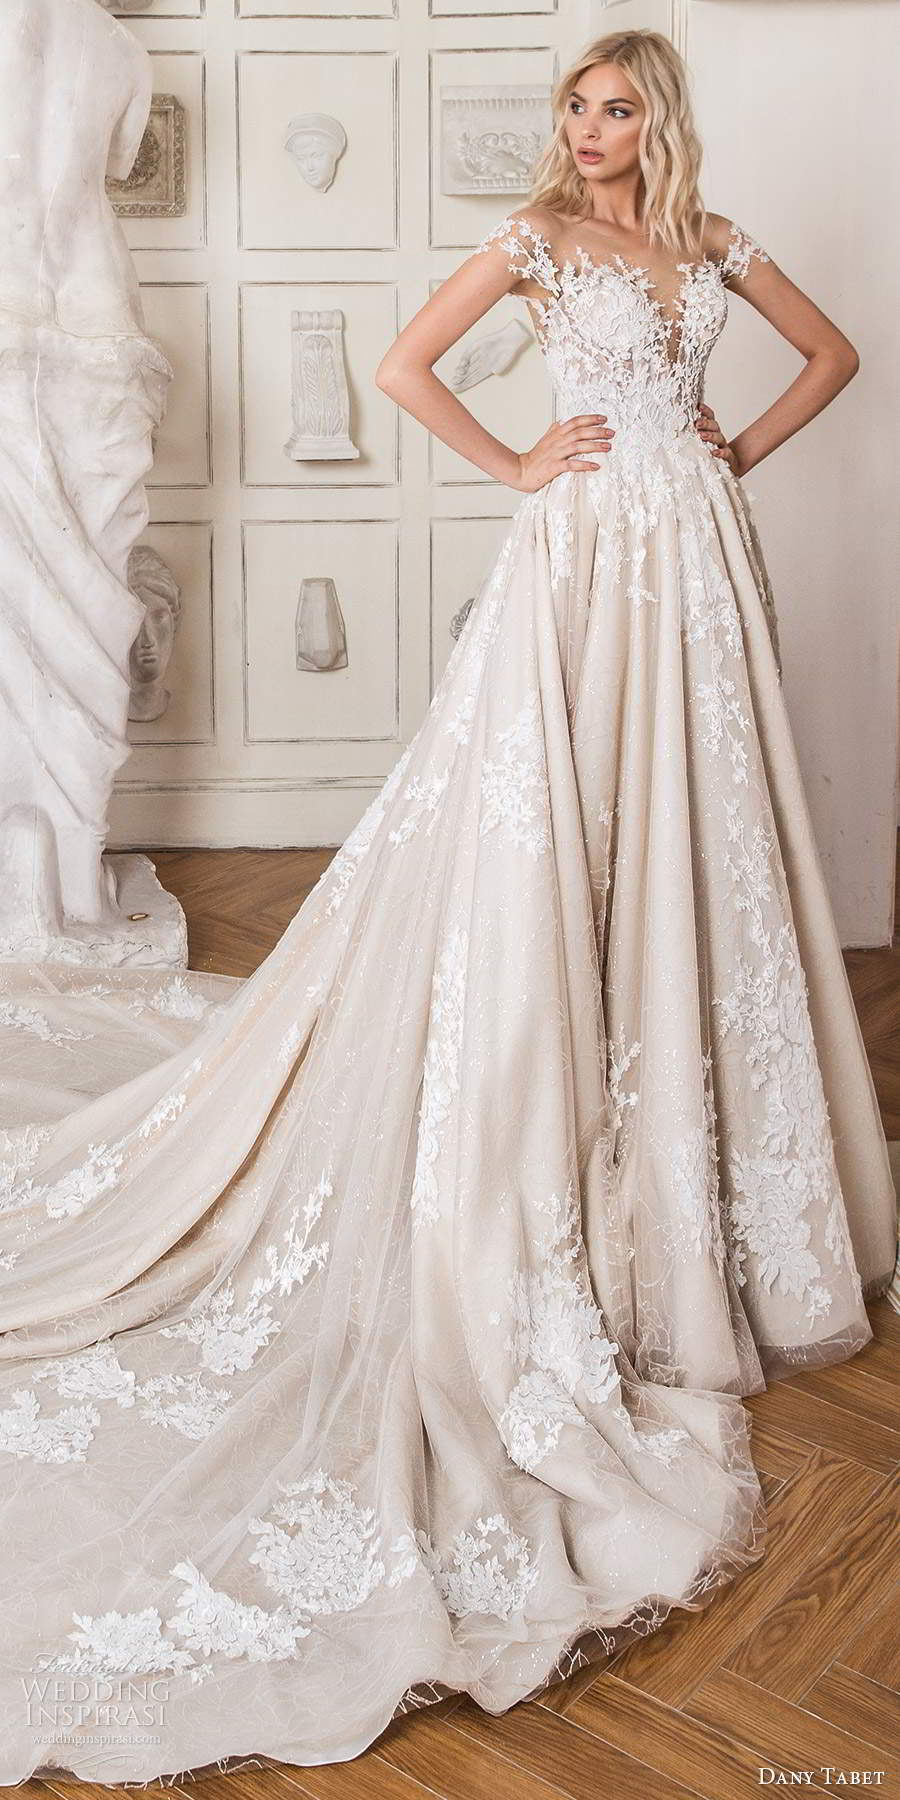 dany tabet 2020 bridal illusion cap sleeves plunging sweetheart neckline fully embellished a line ball gown wedding dress cathedral train (19) mv